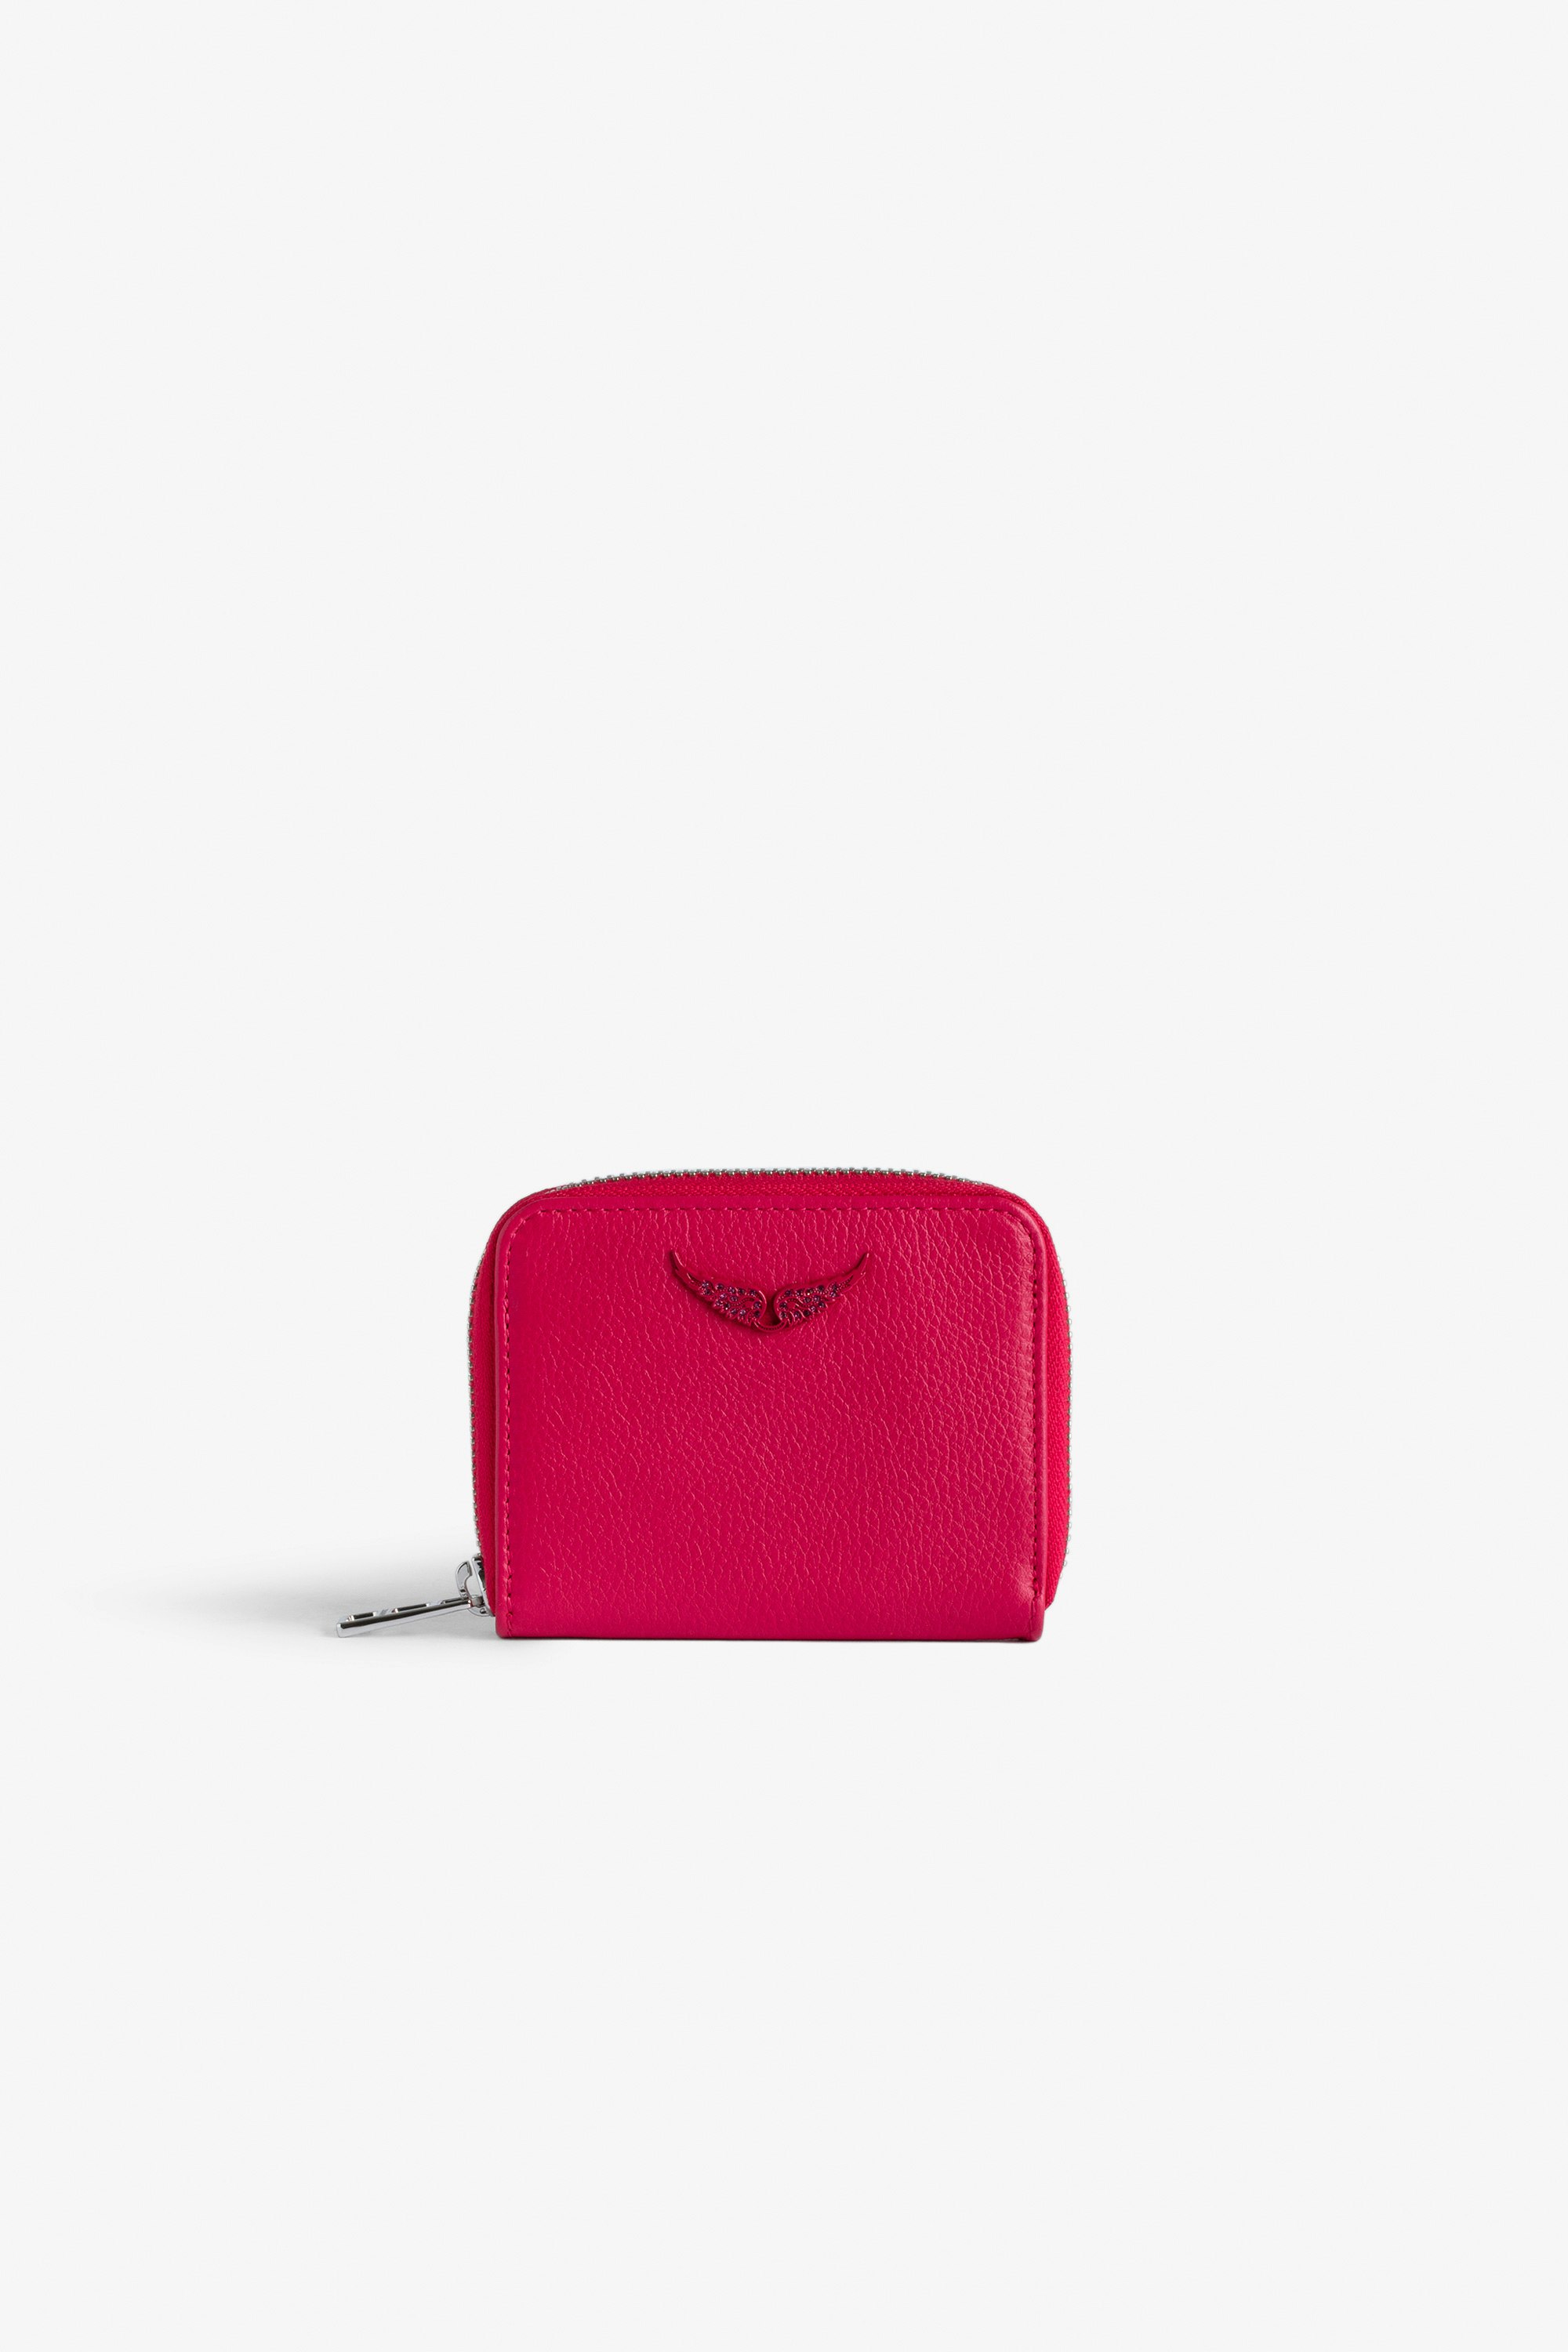 Mini ZV Coin Purse - Women’s pink grained leather wallet with diamanté wings charm.